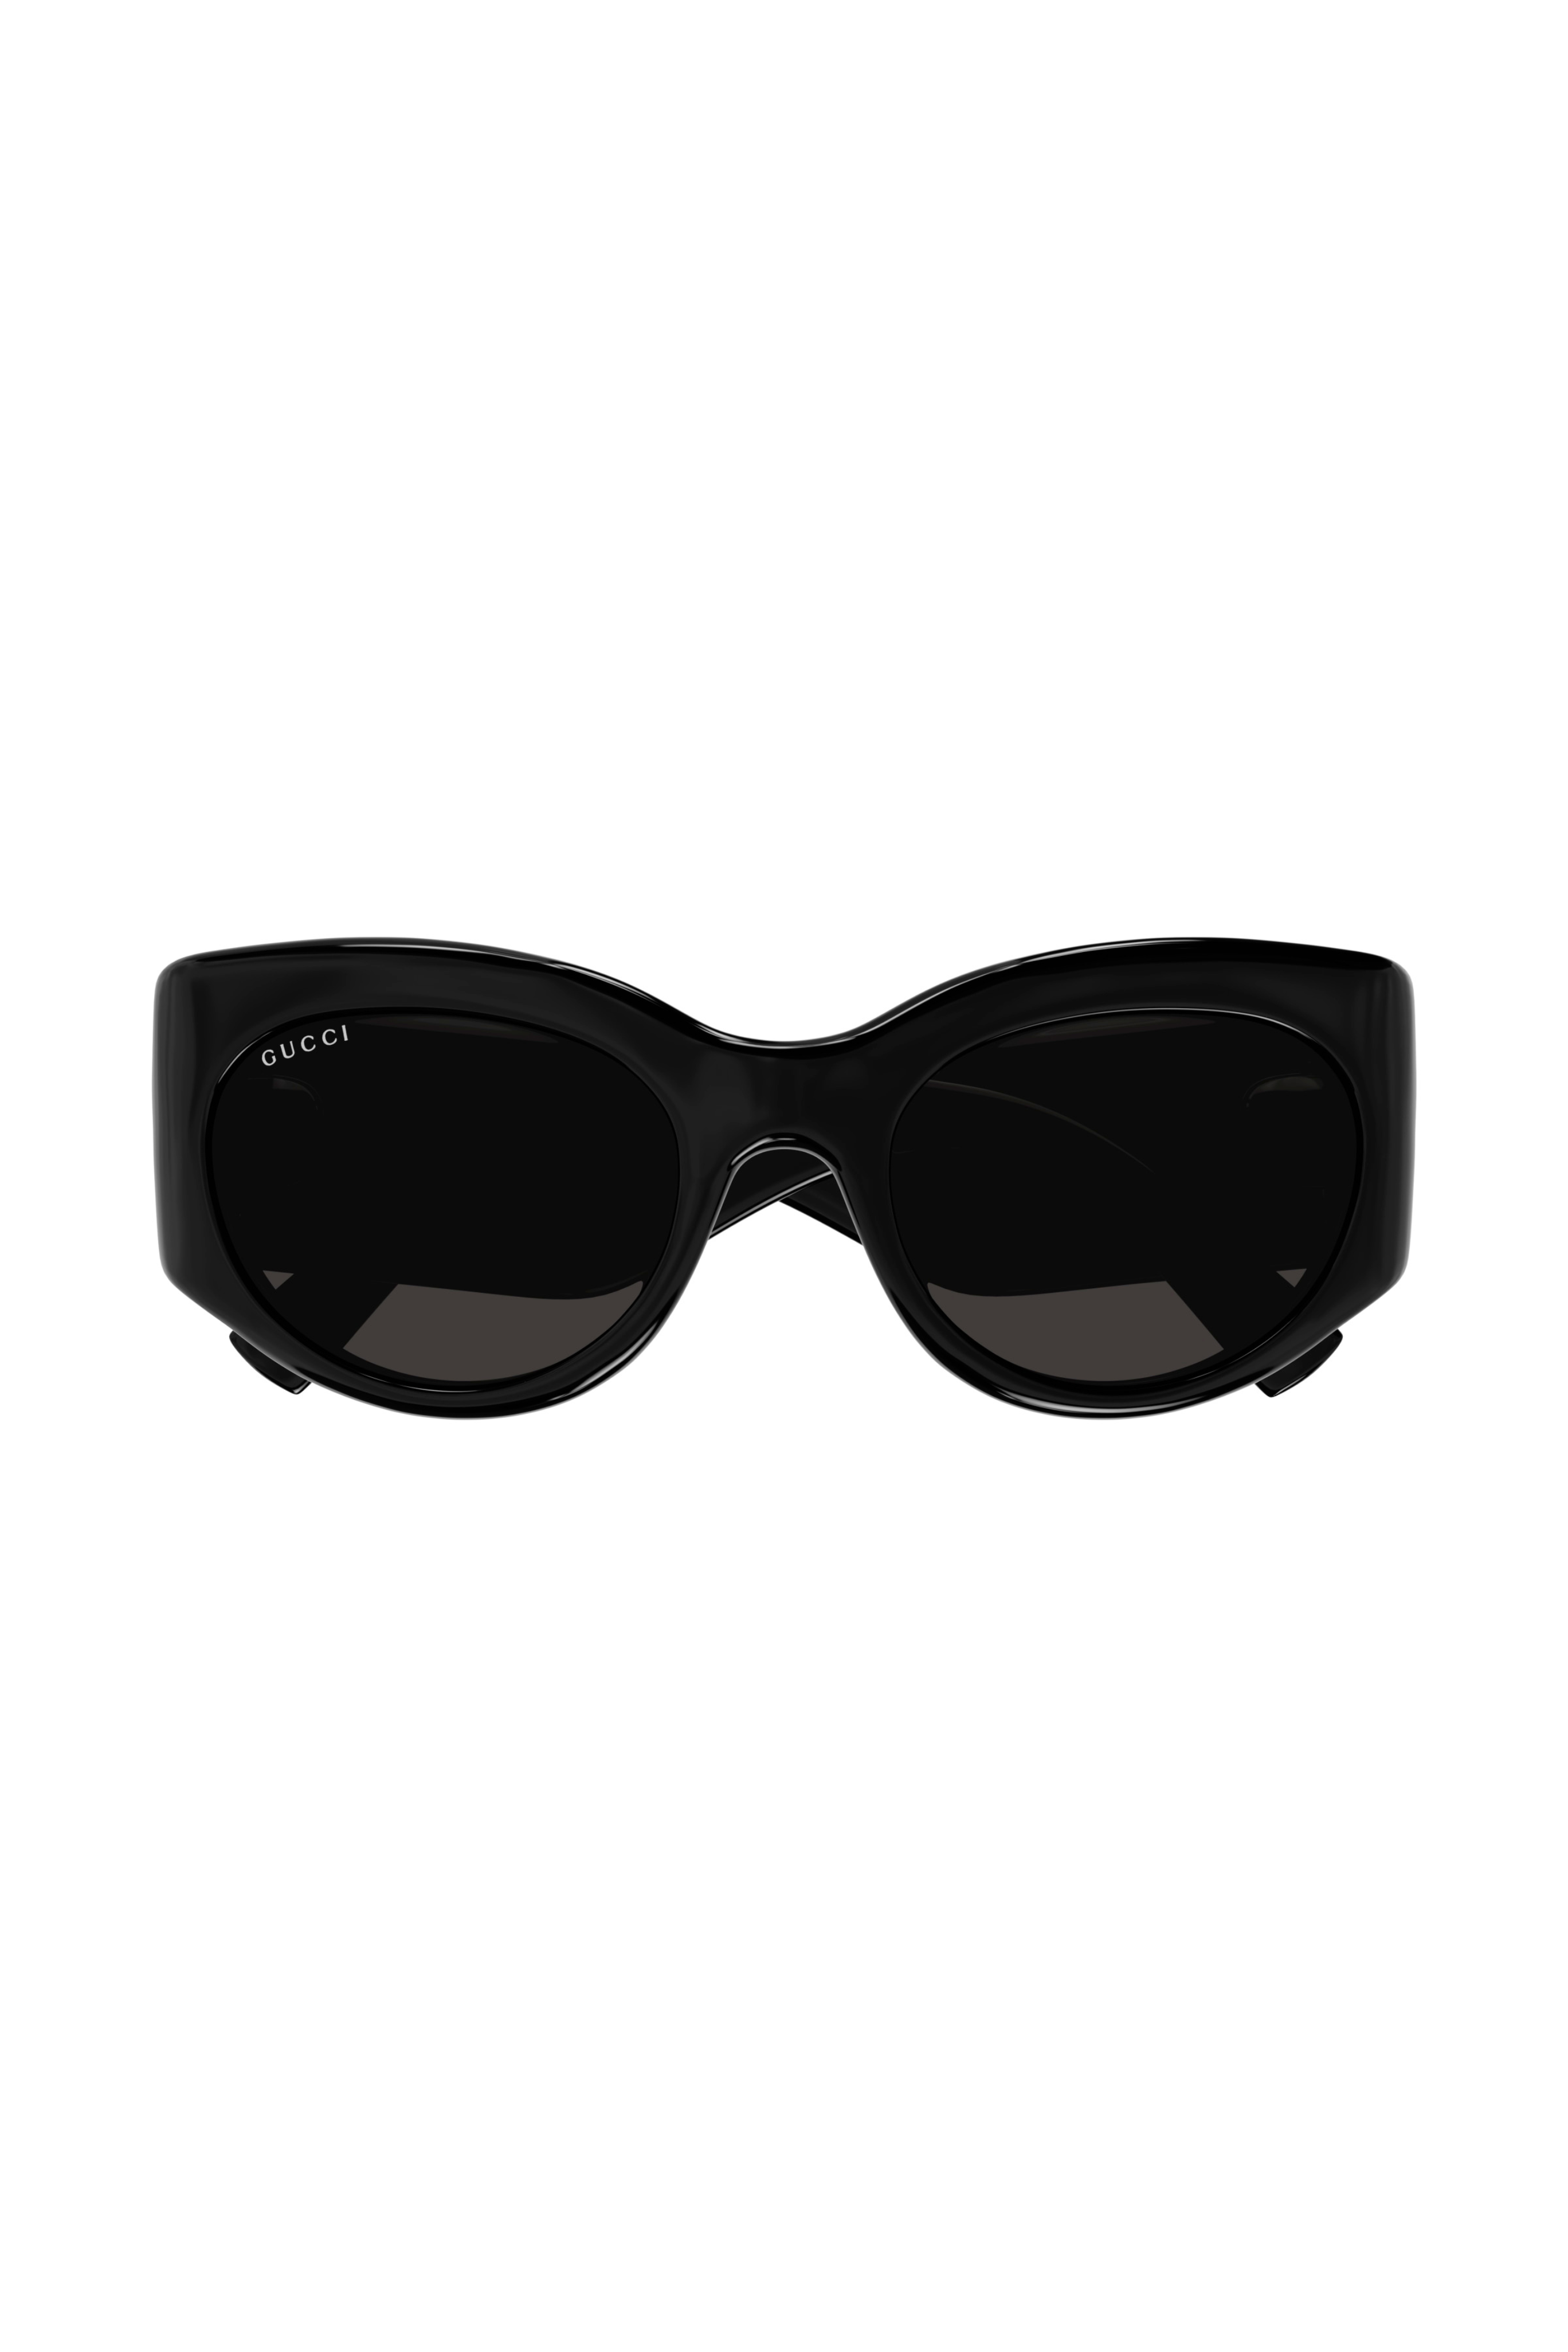 GUCCI Embossed Logo Oval Frame Sunglasses